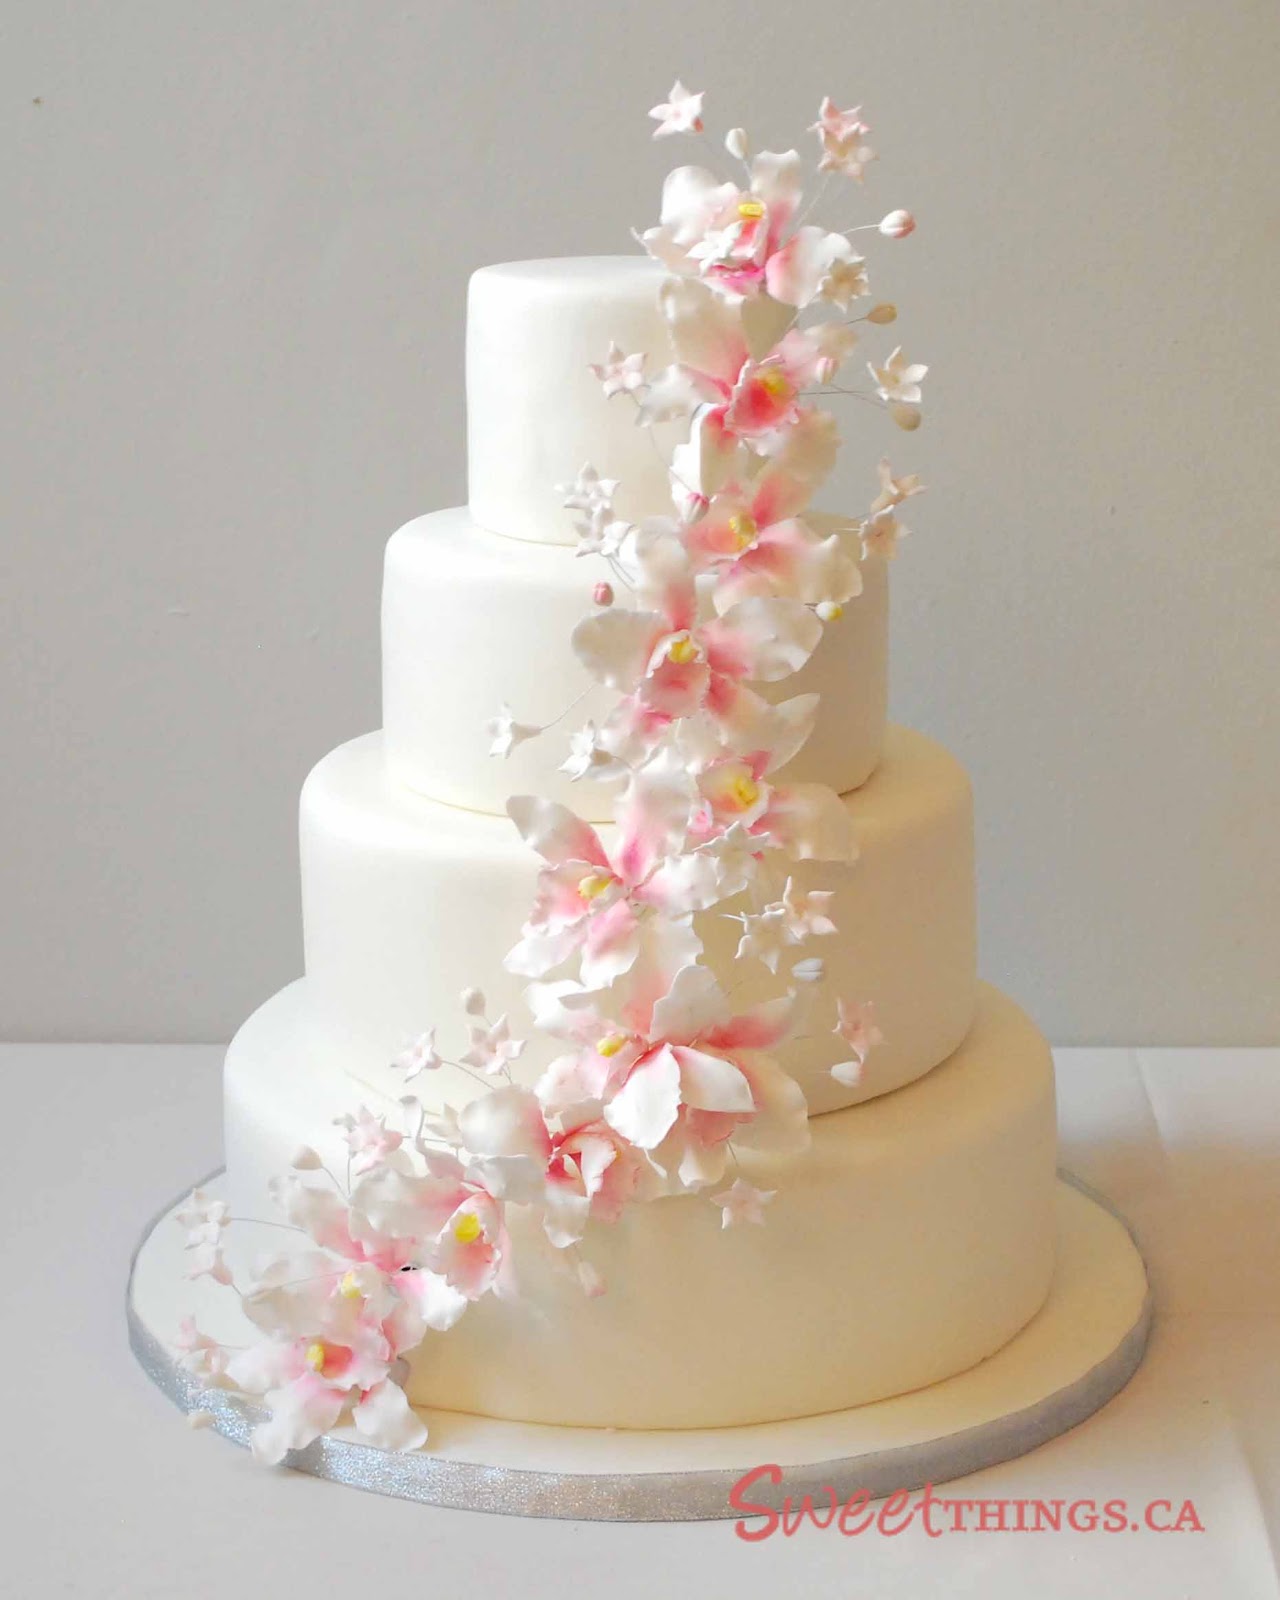 SweetThings: 4tier Wedding Cake with Sugarpaste Orchids